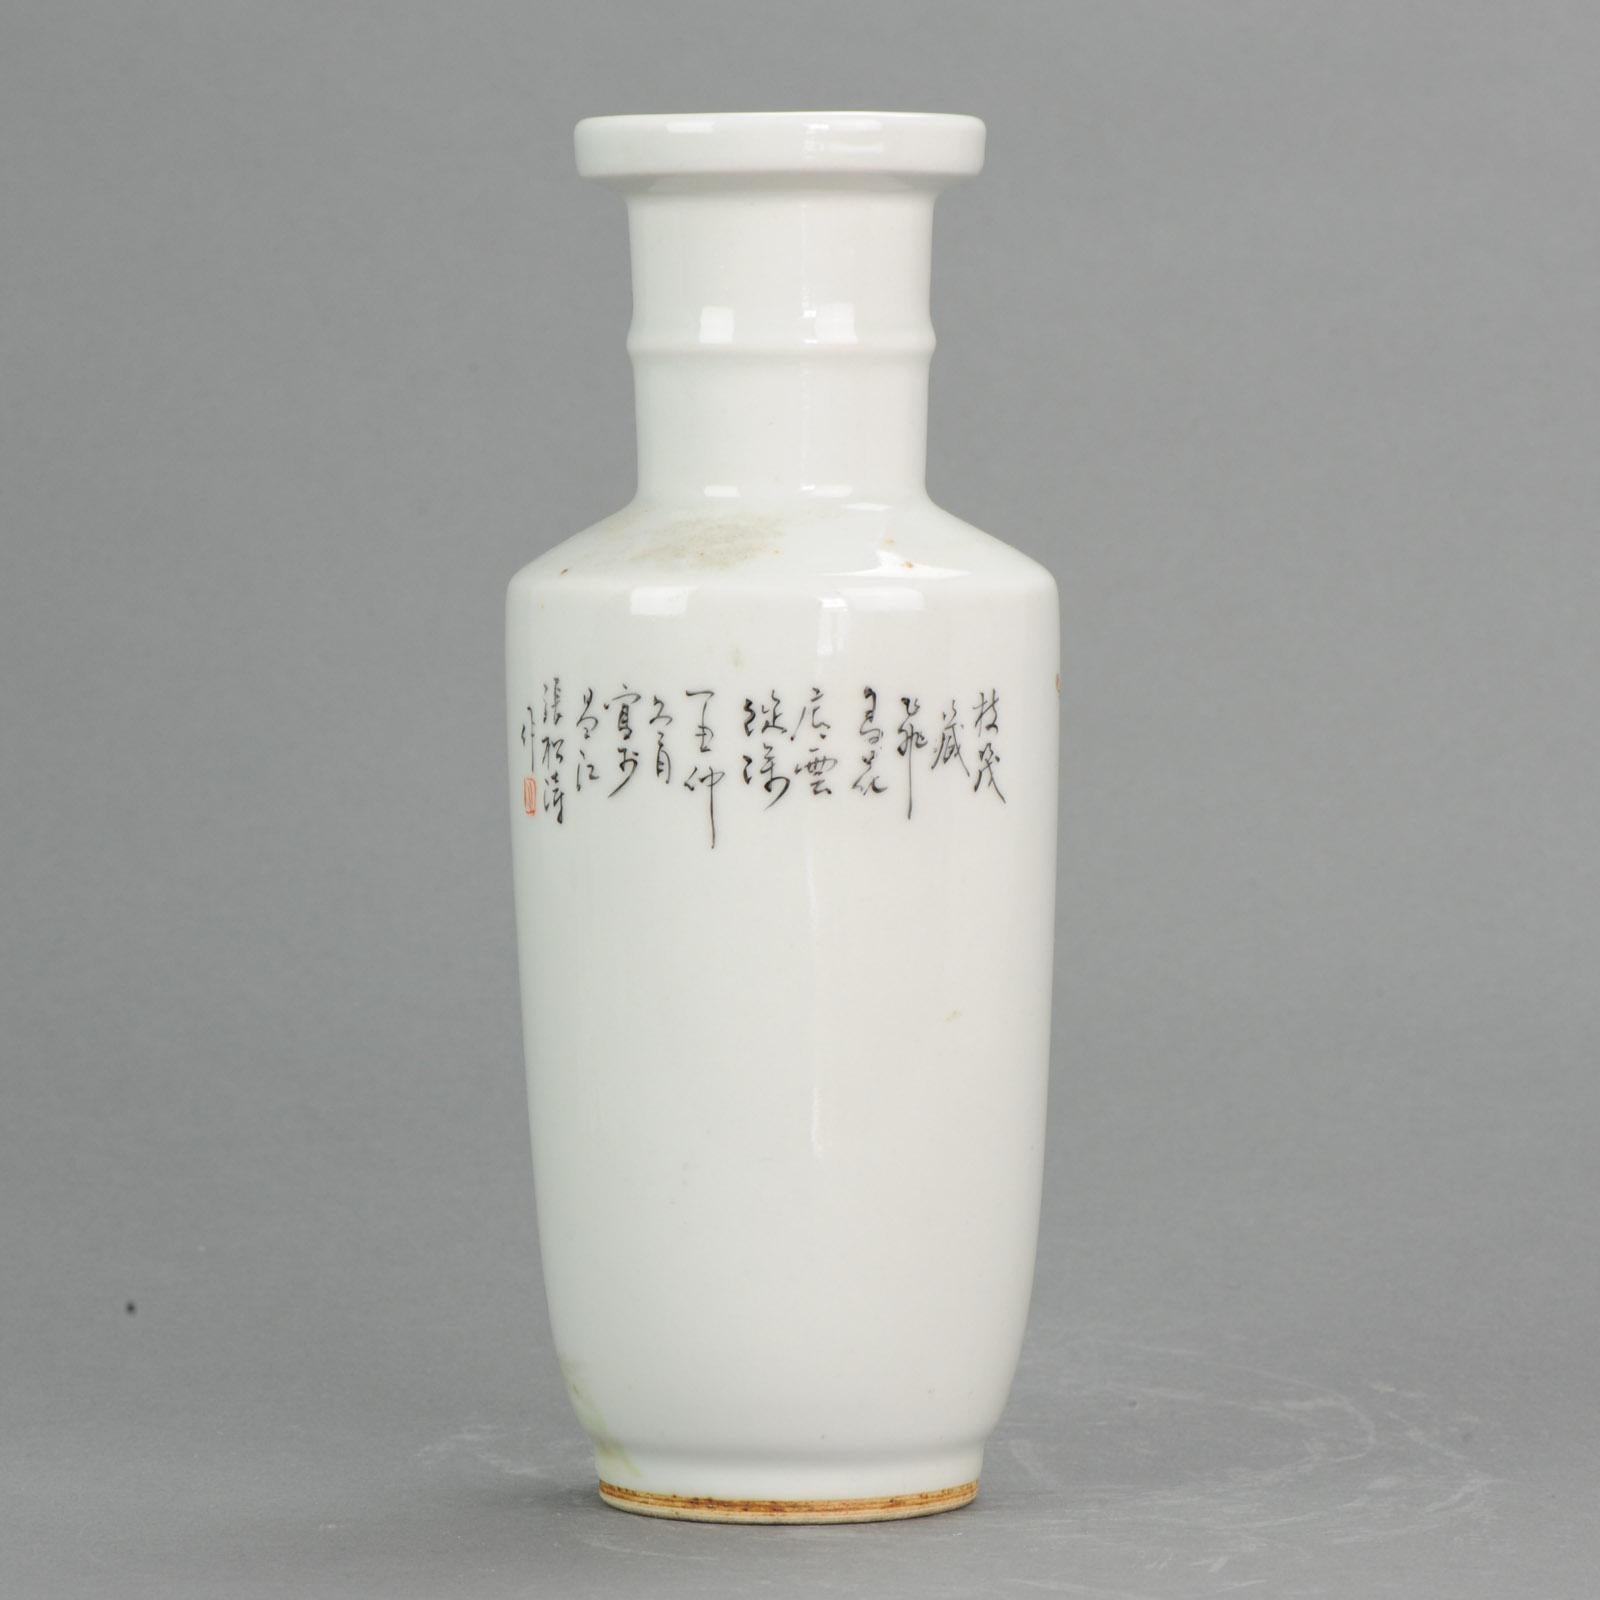 Lovely 20th Century PRoC Chinese Porcelain Vase With birds and Calligraphy 2